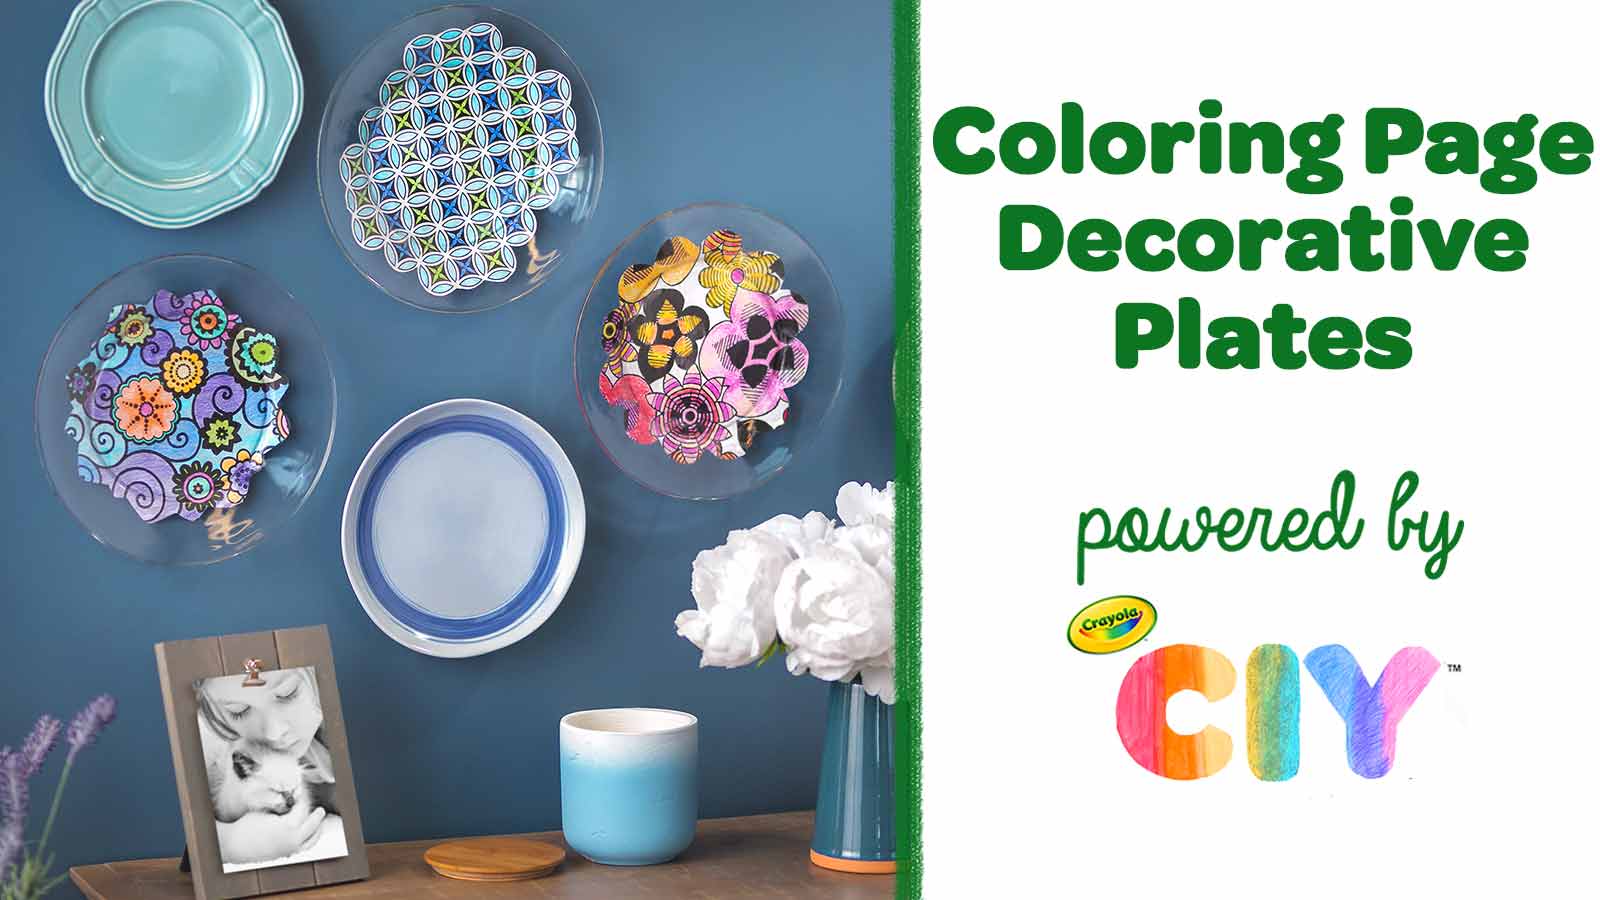 Diy Decoupage Wall Decorative Plates Crafts Crayola Com Crayola Ciy Diy Crafts For Kids And Adults Crayola Com Small round lace display plate with a victorian couple with blue toile in the center has a dark blue color ribbon for hanging darling plate would be the perfect. coloring page decorative plates